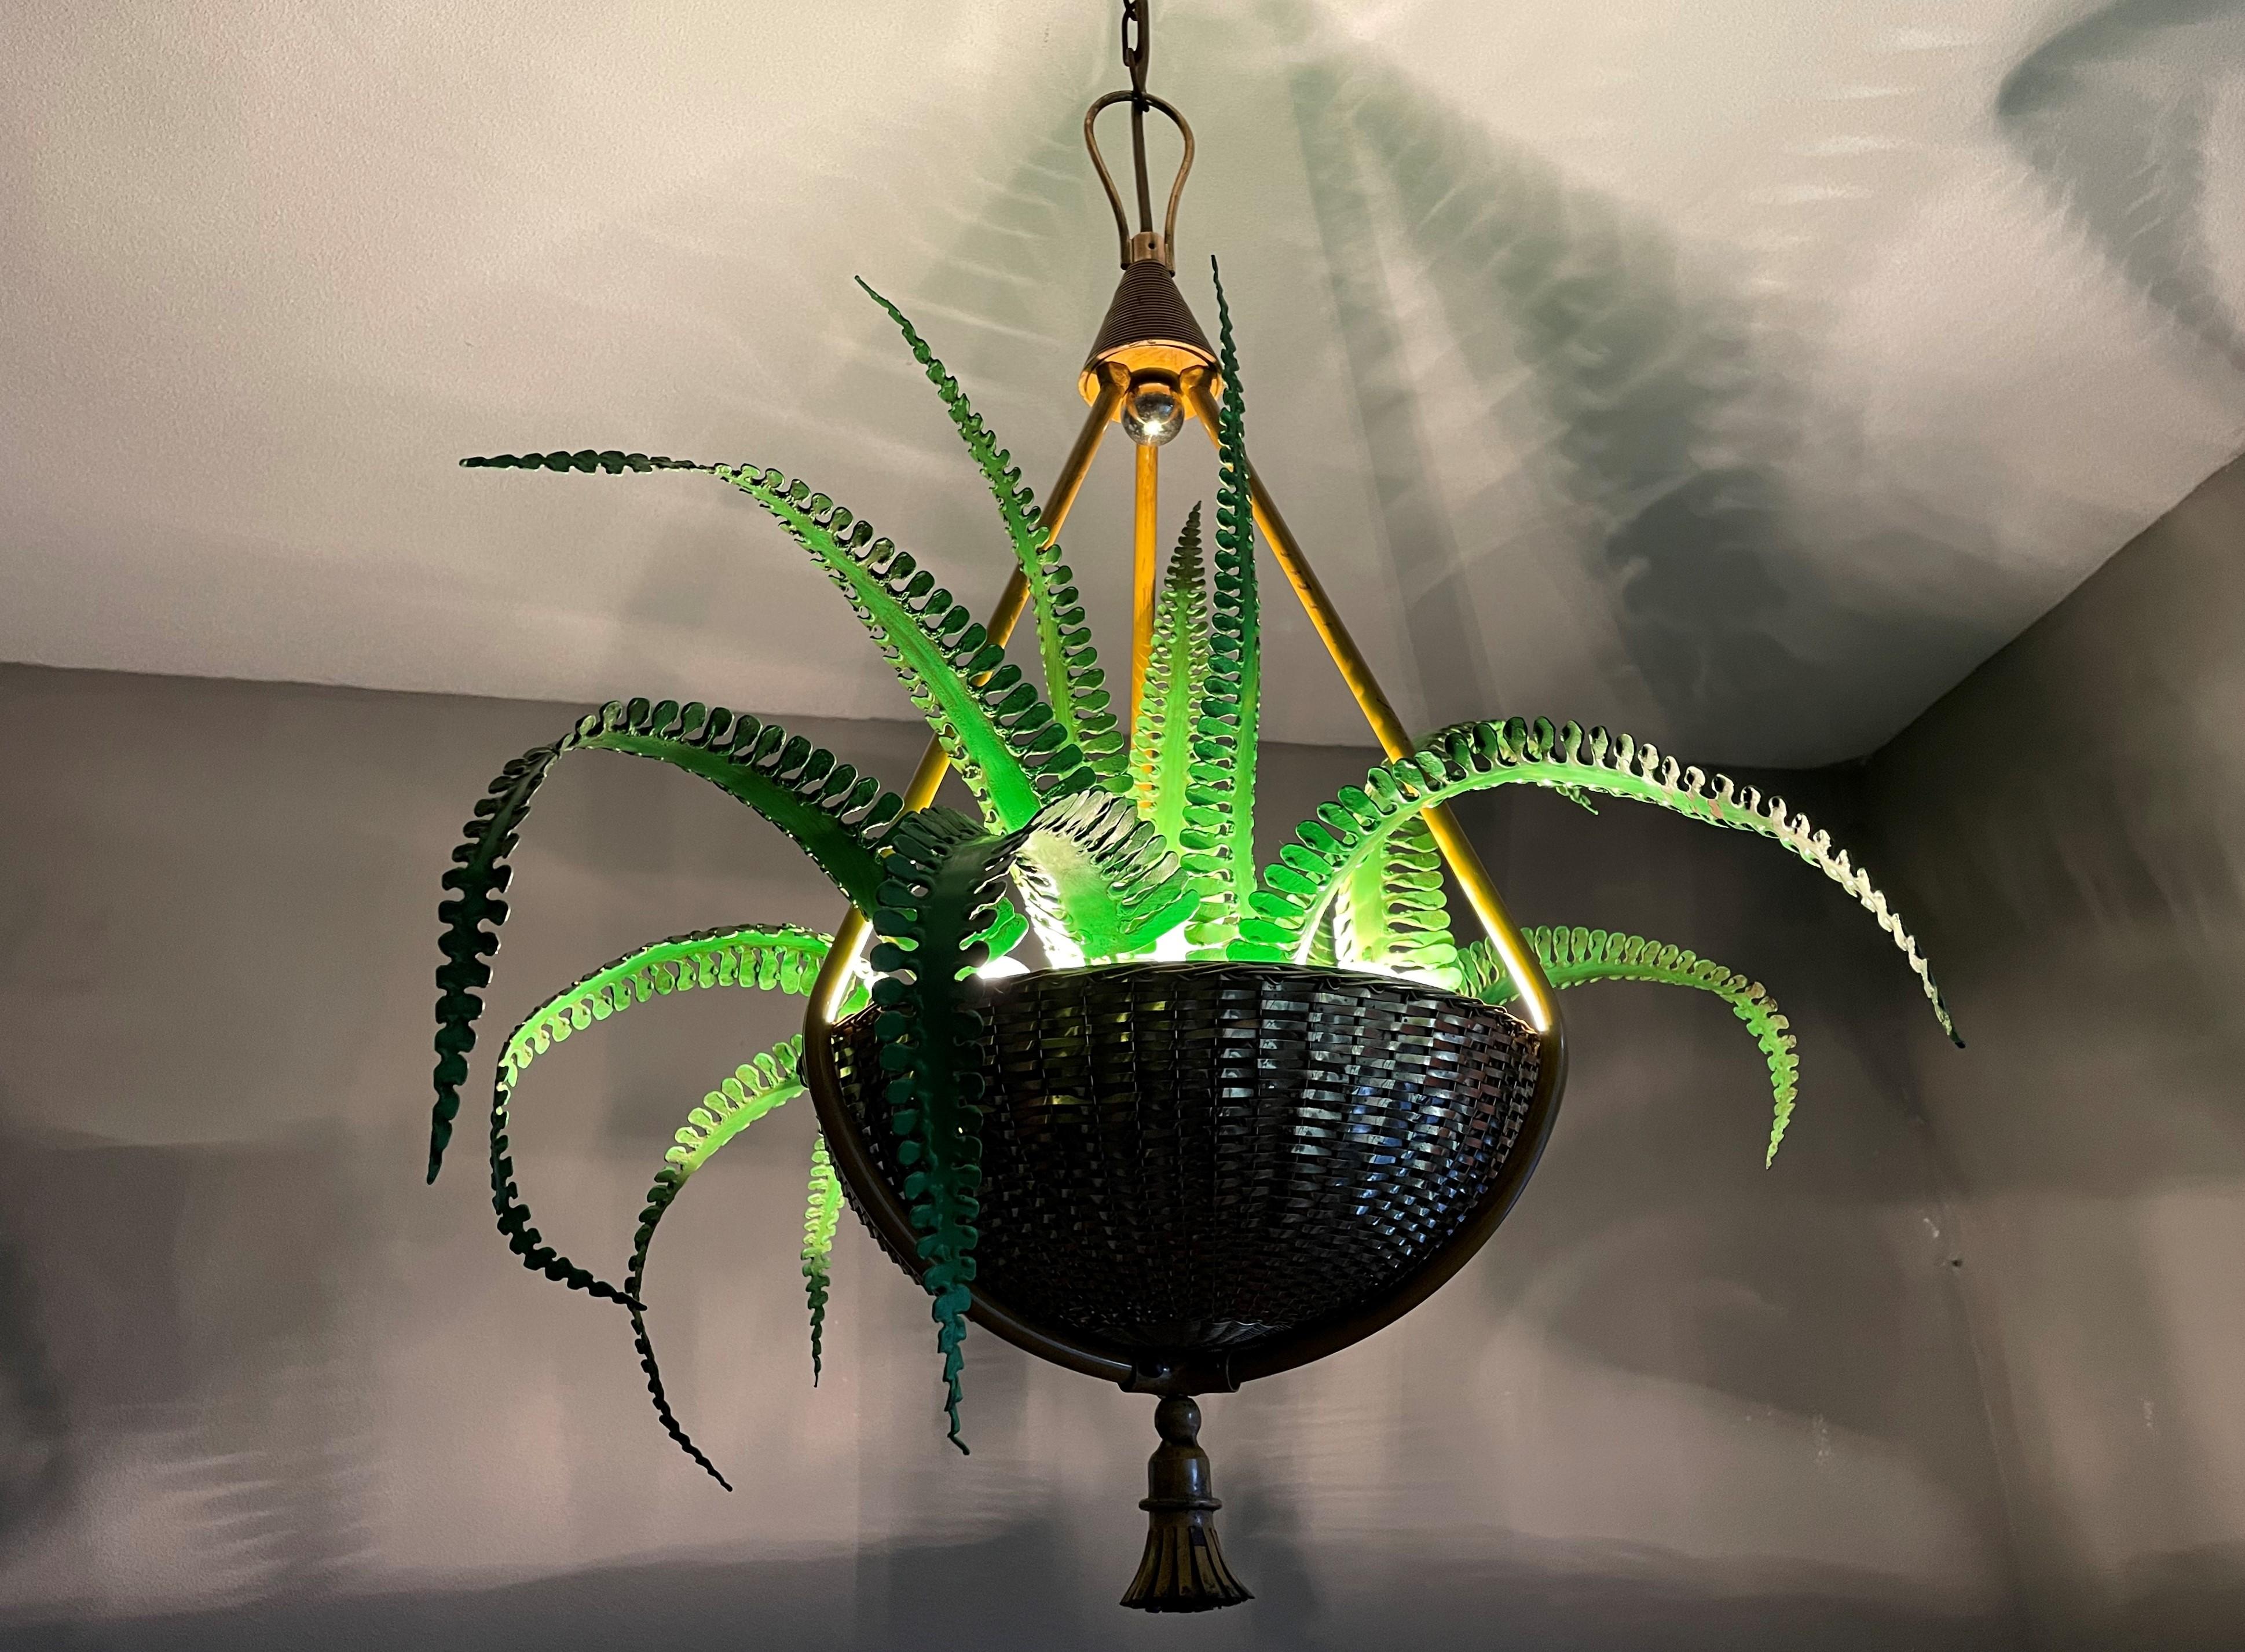 Truly artistic & extremely rare, midcentury made, fern plant in wicker-like basket chandelier.

If you are looking for a striking and extraordinary light fixture to grace your living space then this French work of lighting art could be the one for